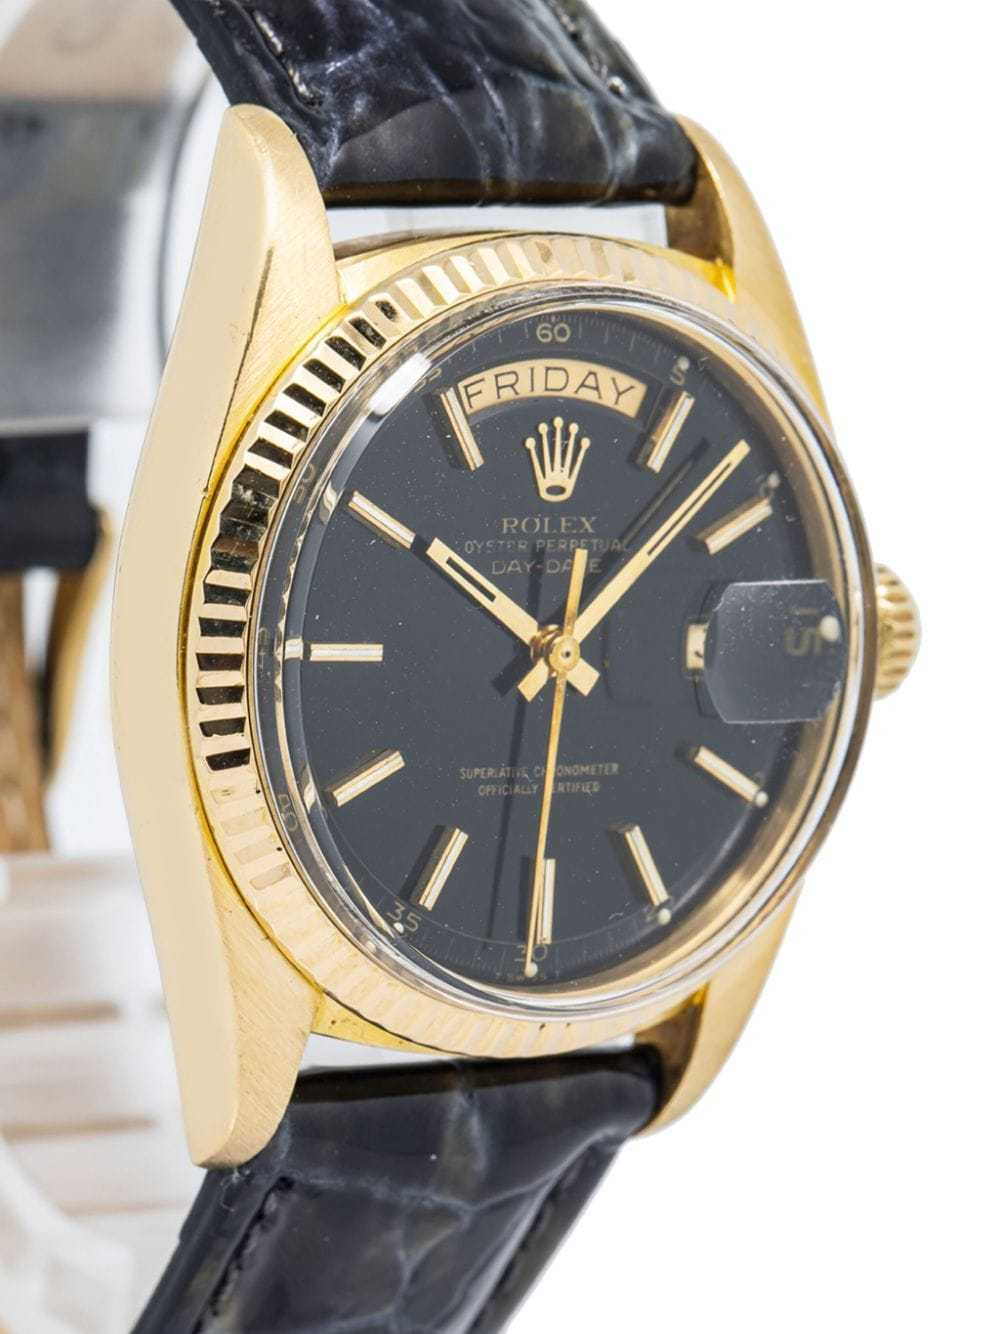 Rolex pre-owned Day-Date 36mm - Black - image 4